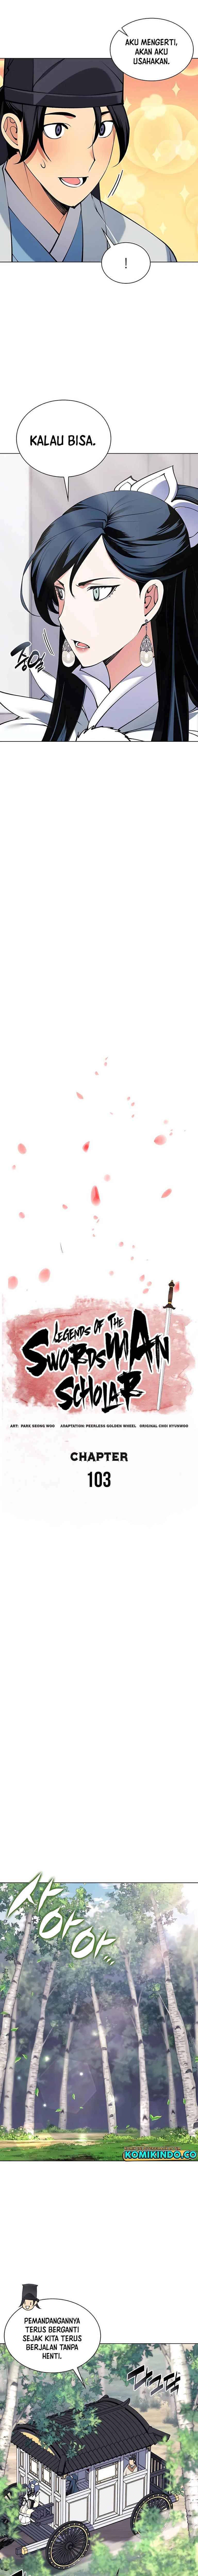 Records of the Swordsman Scholar Chapter 103